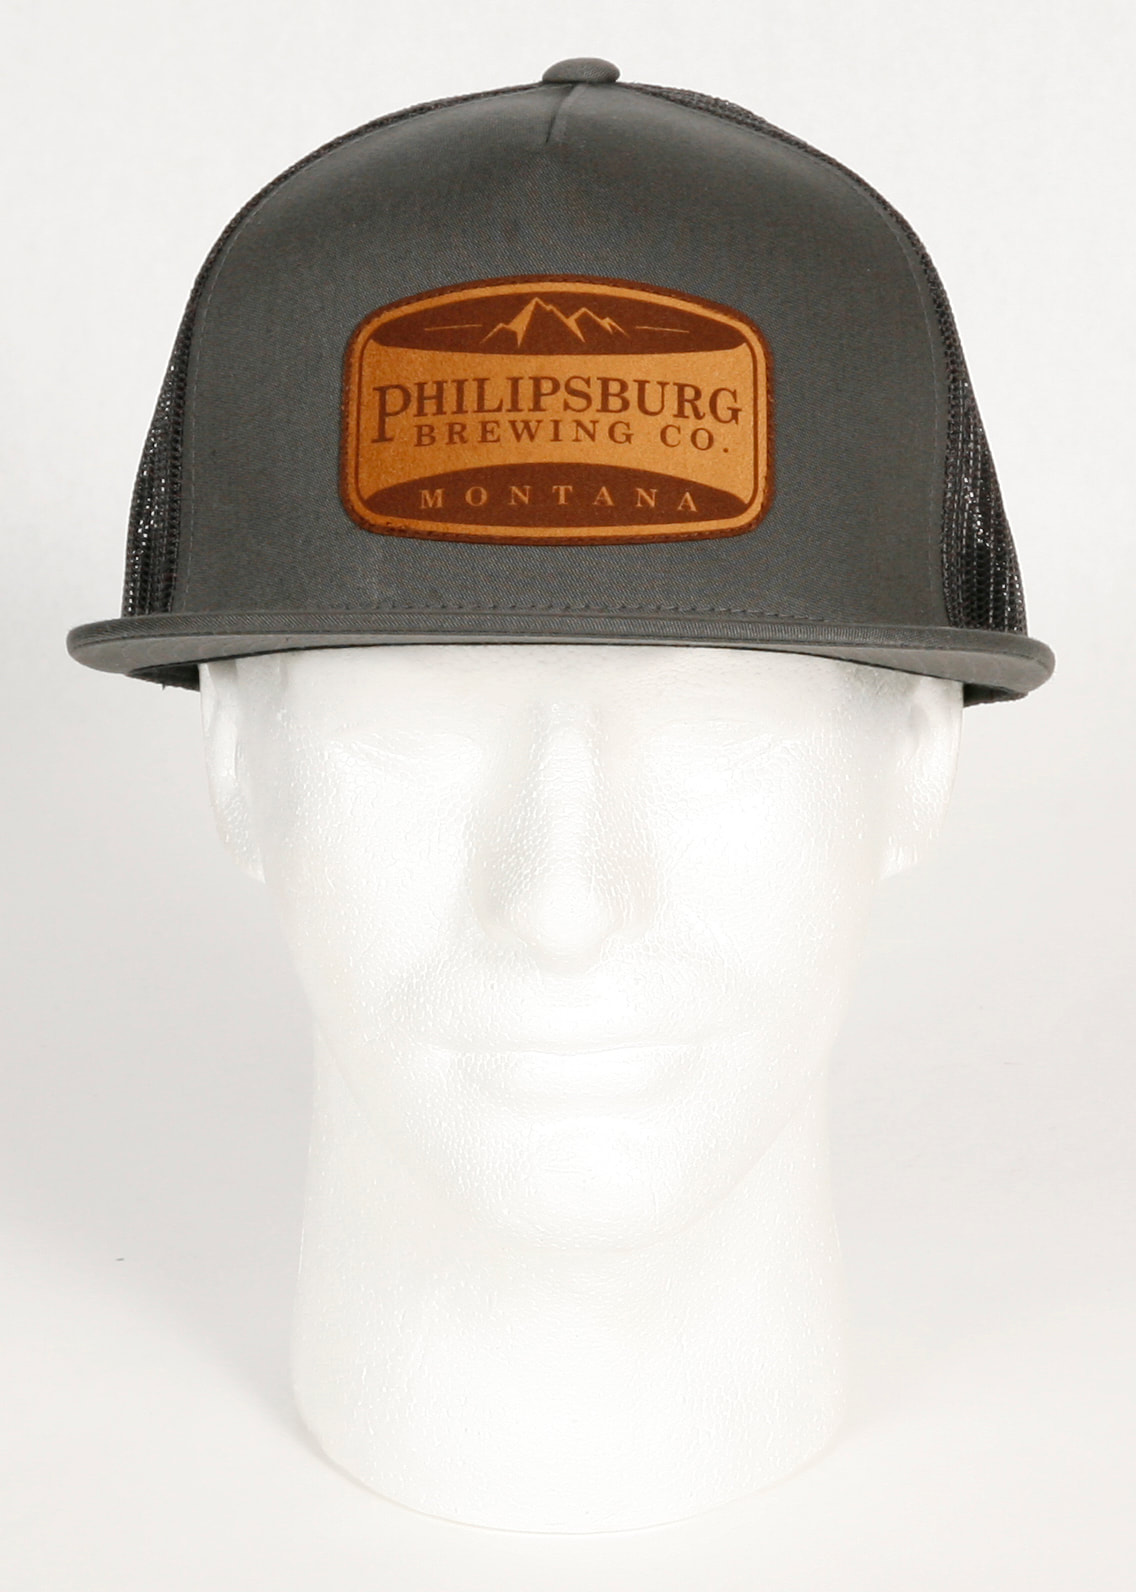 Trucker Company Brewing Patch with Flexfit Suede Philipsburg